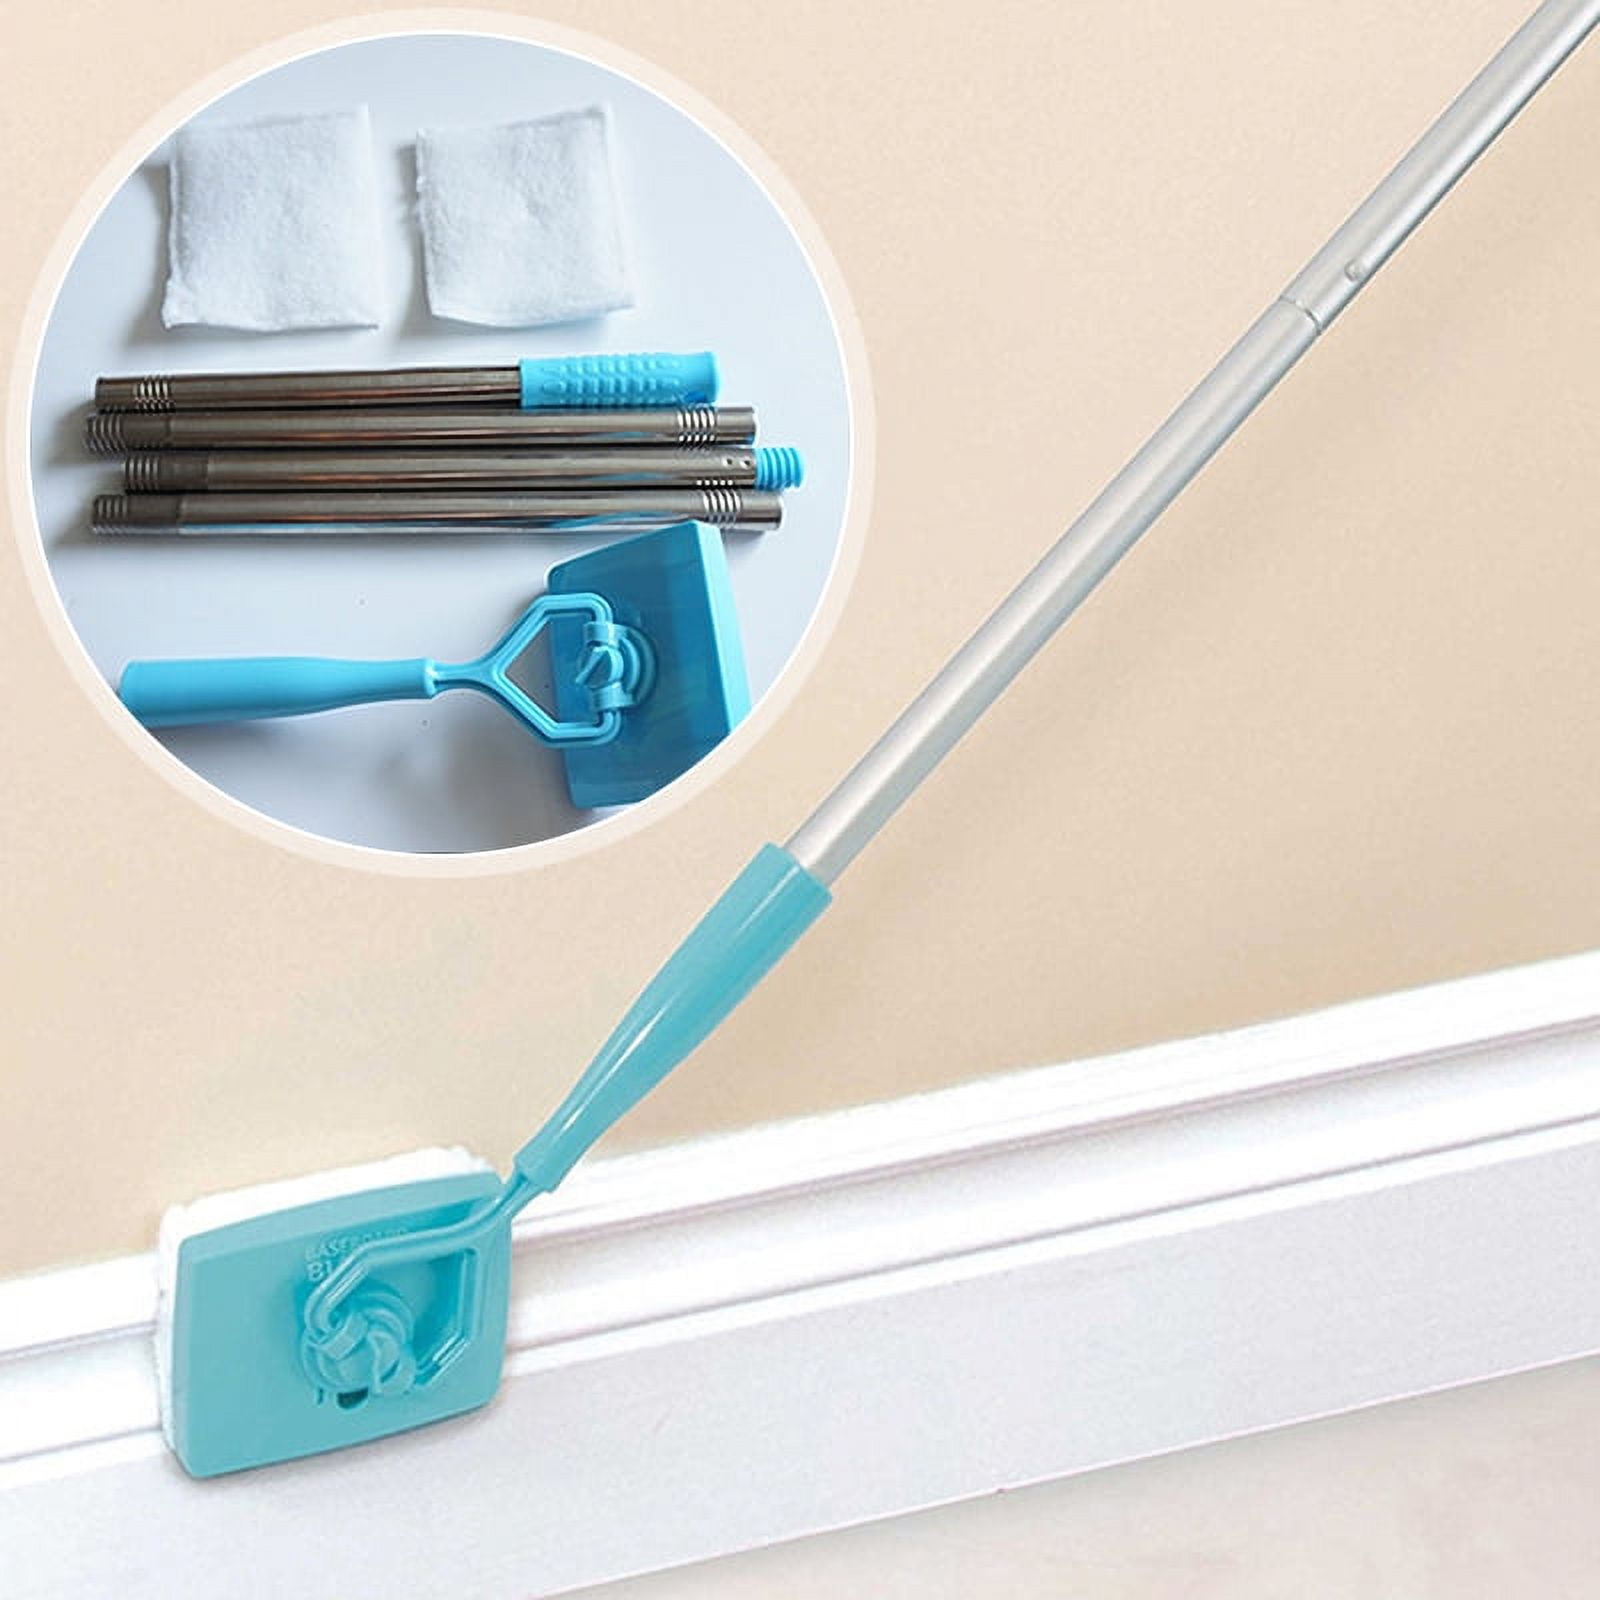 Baseboard Cleaner Tool with Handle, 5 Reusable Cleaning Pads, No-Bending  Mop Baseboard Cleaner Tool Long Handle Adjustable Baseboard Molding Tool  for Bathroom Microfiber Cleaning 